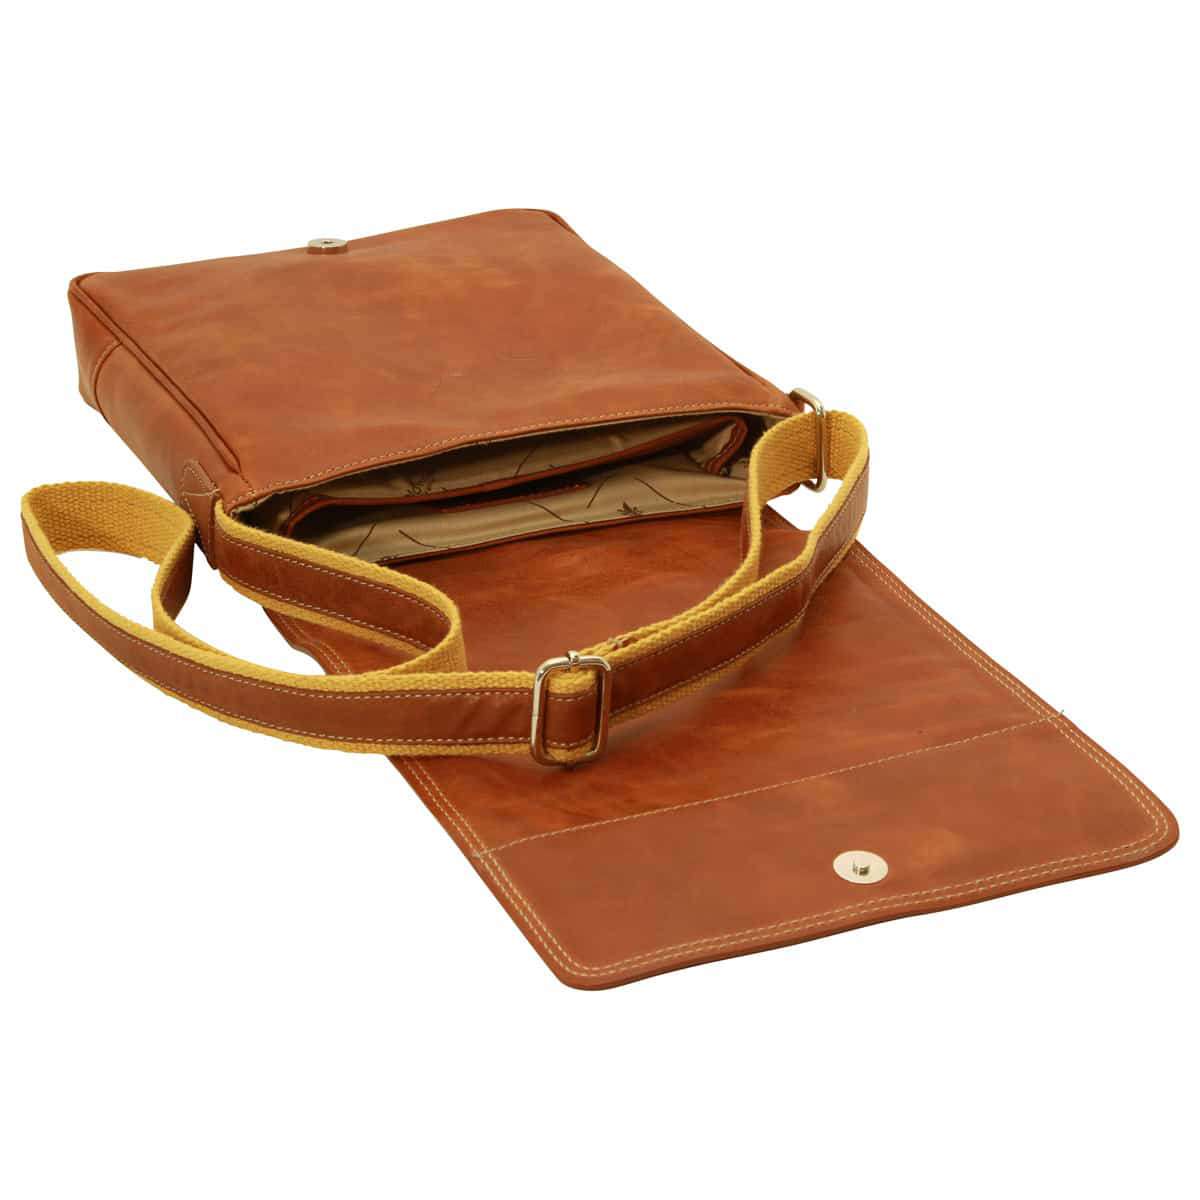 Leather I-Pad bag - Brown Colonial | 087361CO UK | Old Angler Firenze